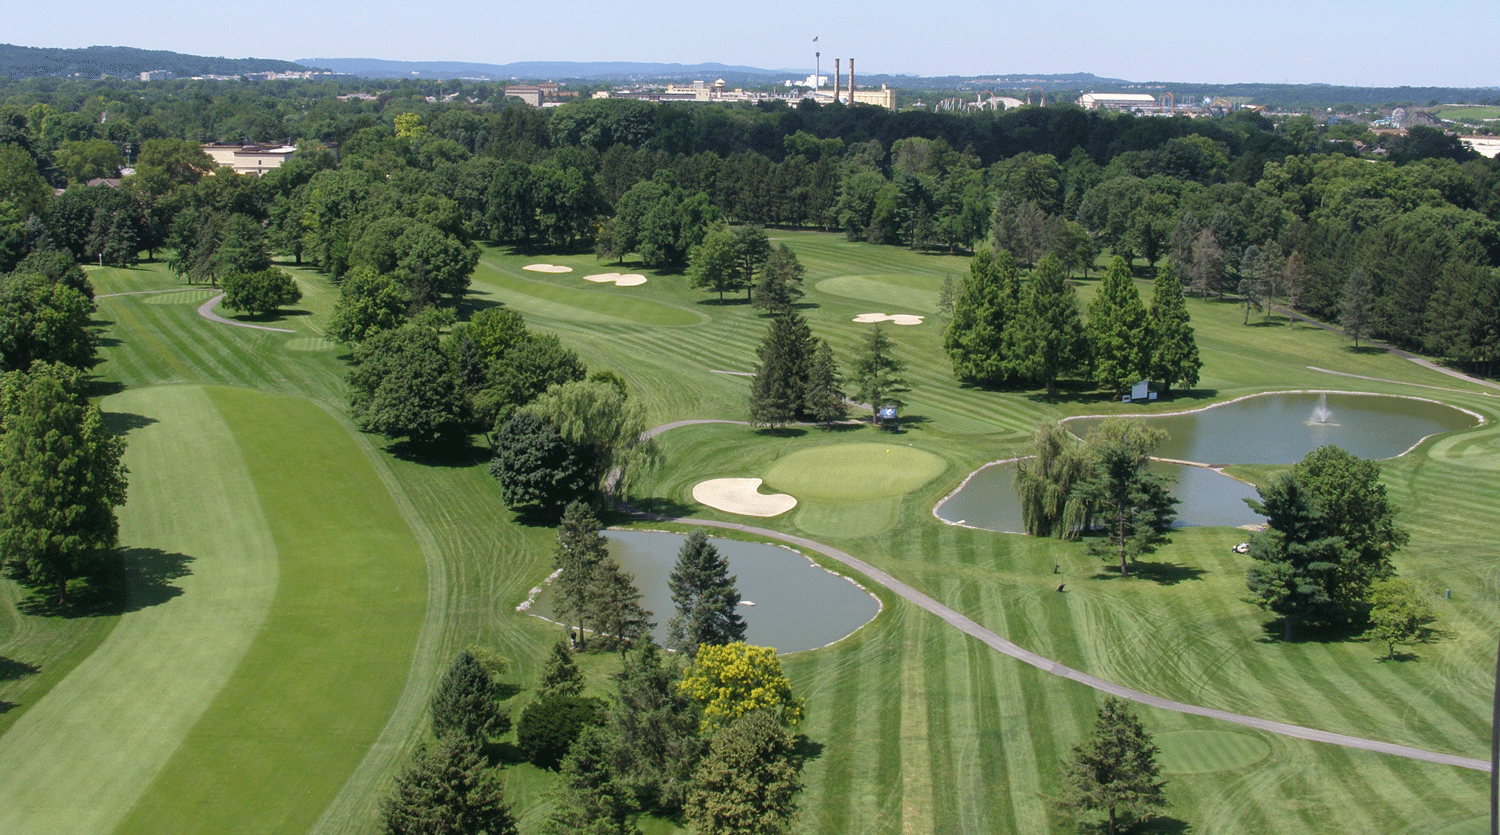 Hotel Hershey guests can tee it up at Hershey Country Club.